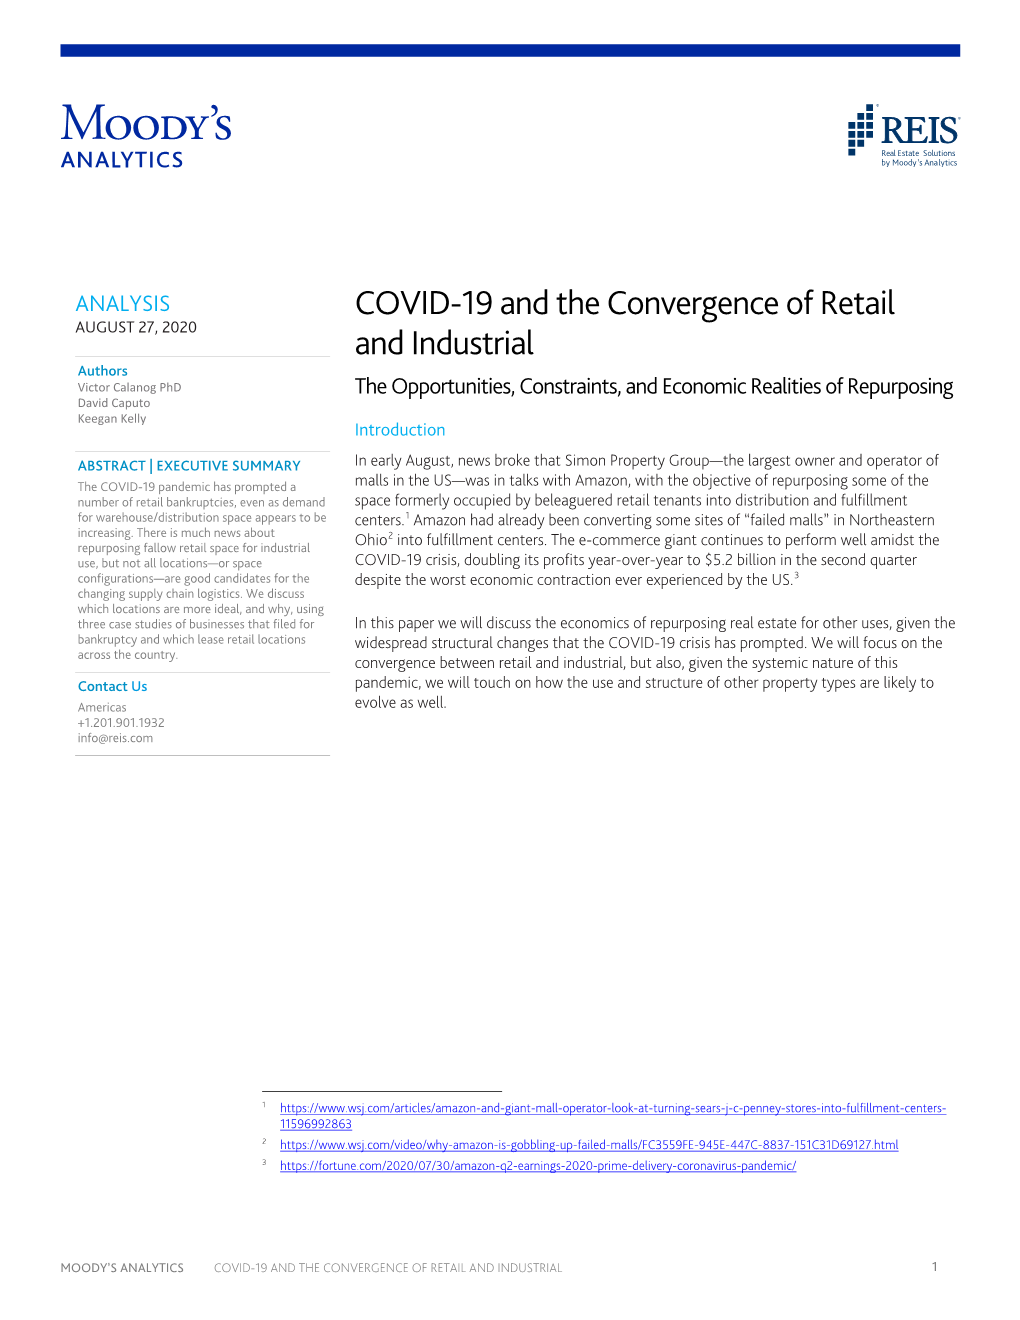 Covid-19 and the Convergence of Retail and Industrial 1